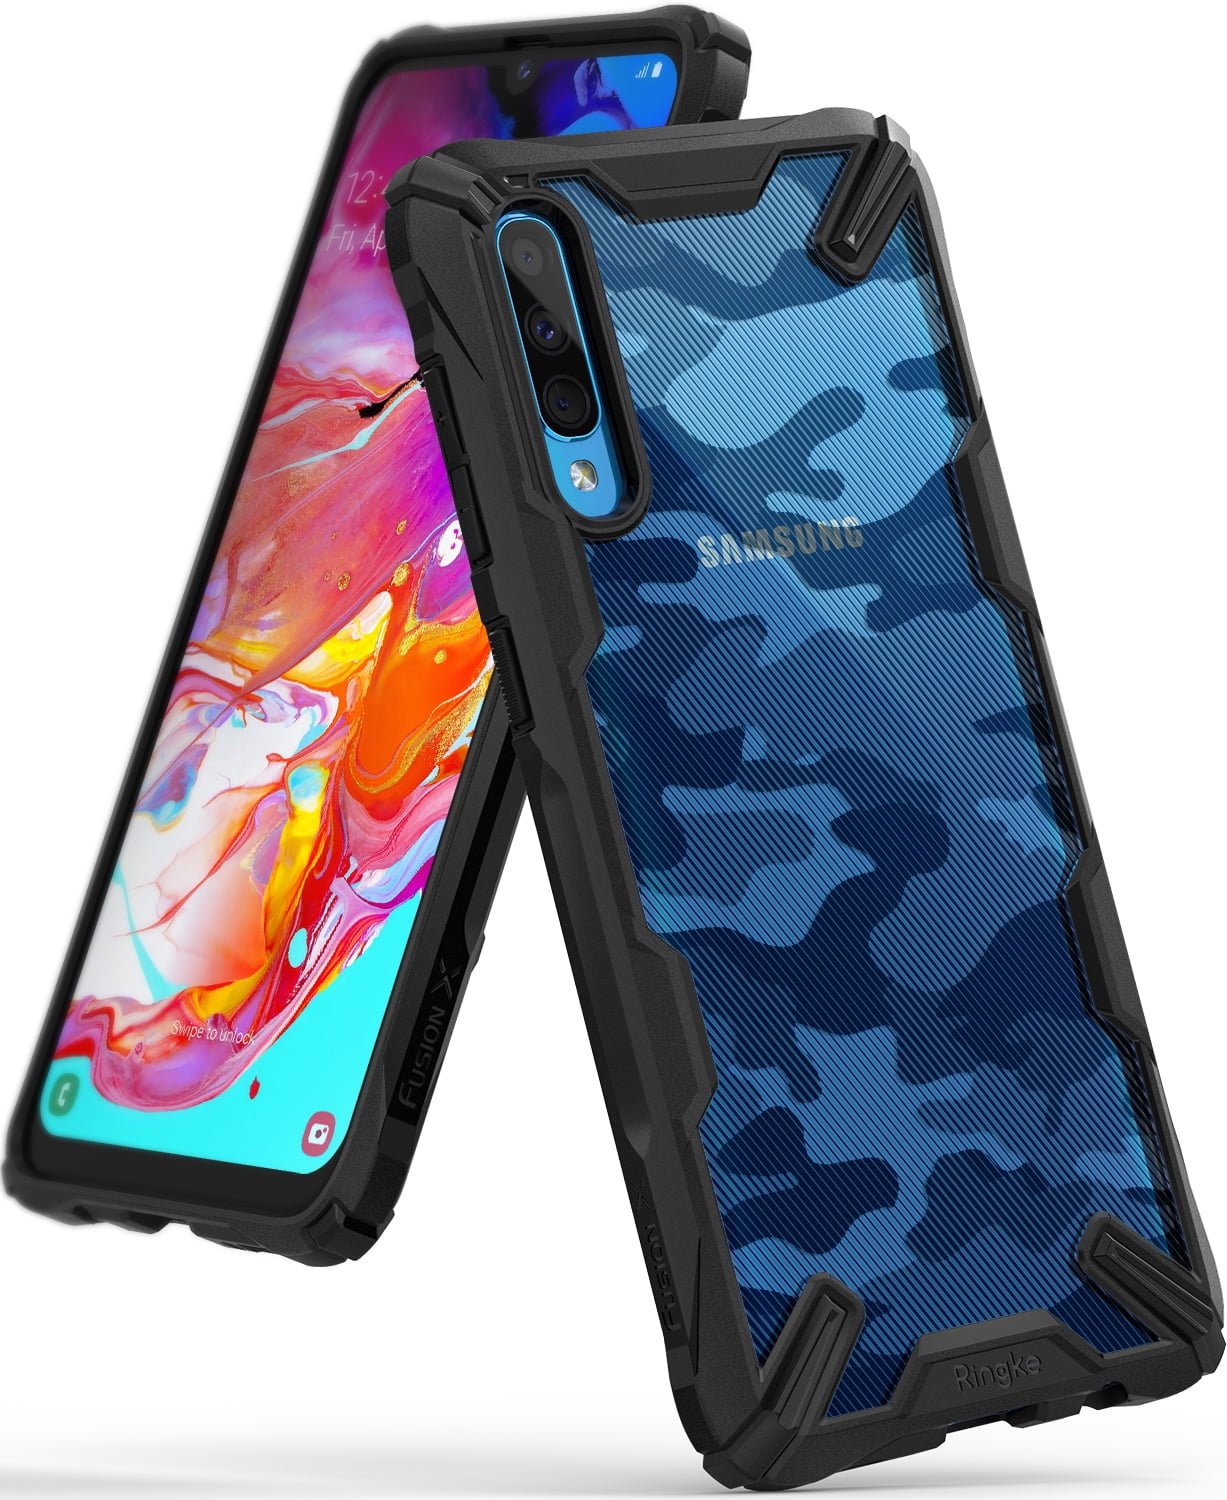 Ringke Case Compatible with Samsung Galaxy A70, Transparent Hard Back Shockproof Advanced Cover - Blue Walmart.com